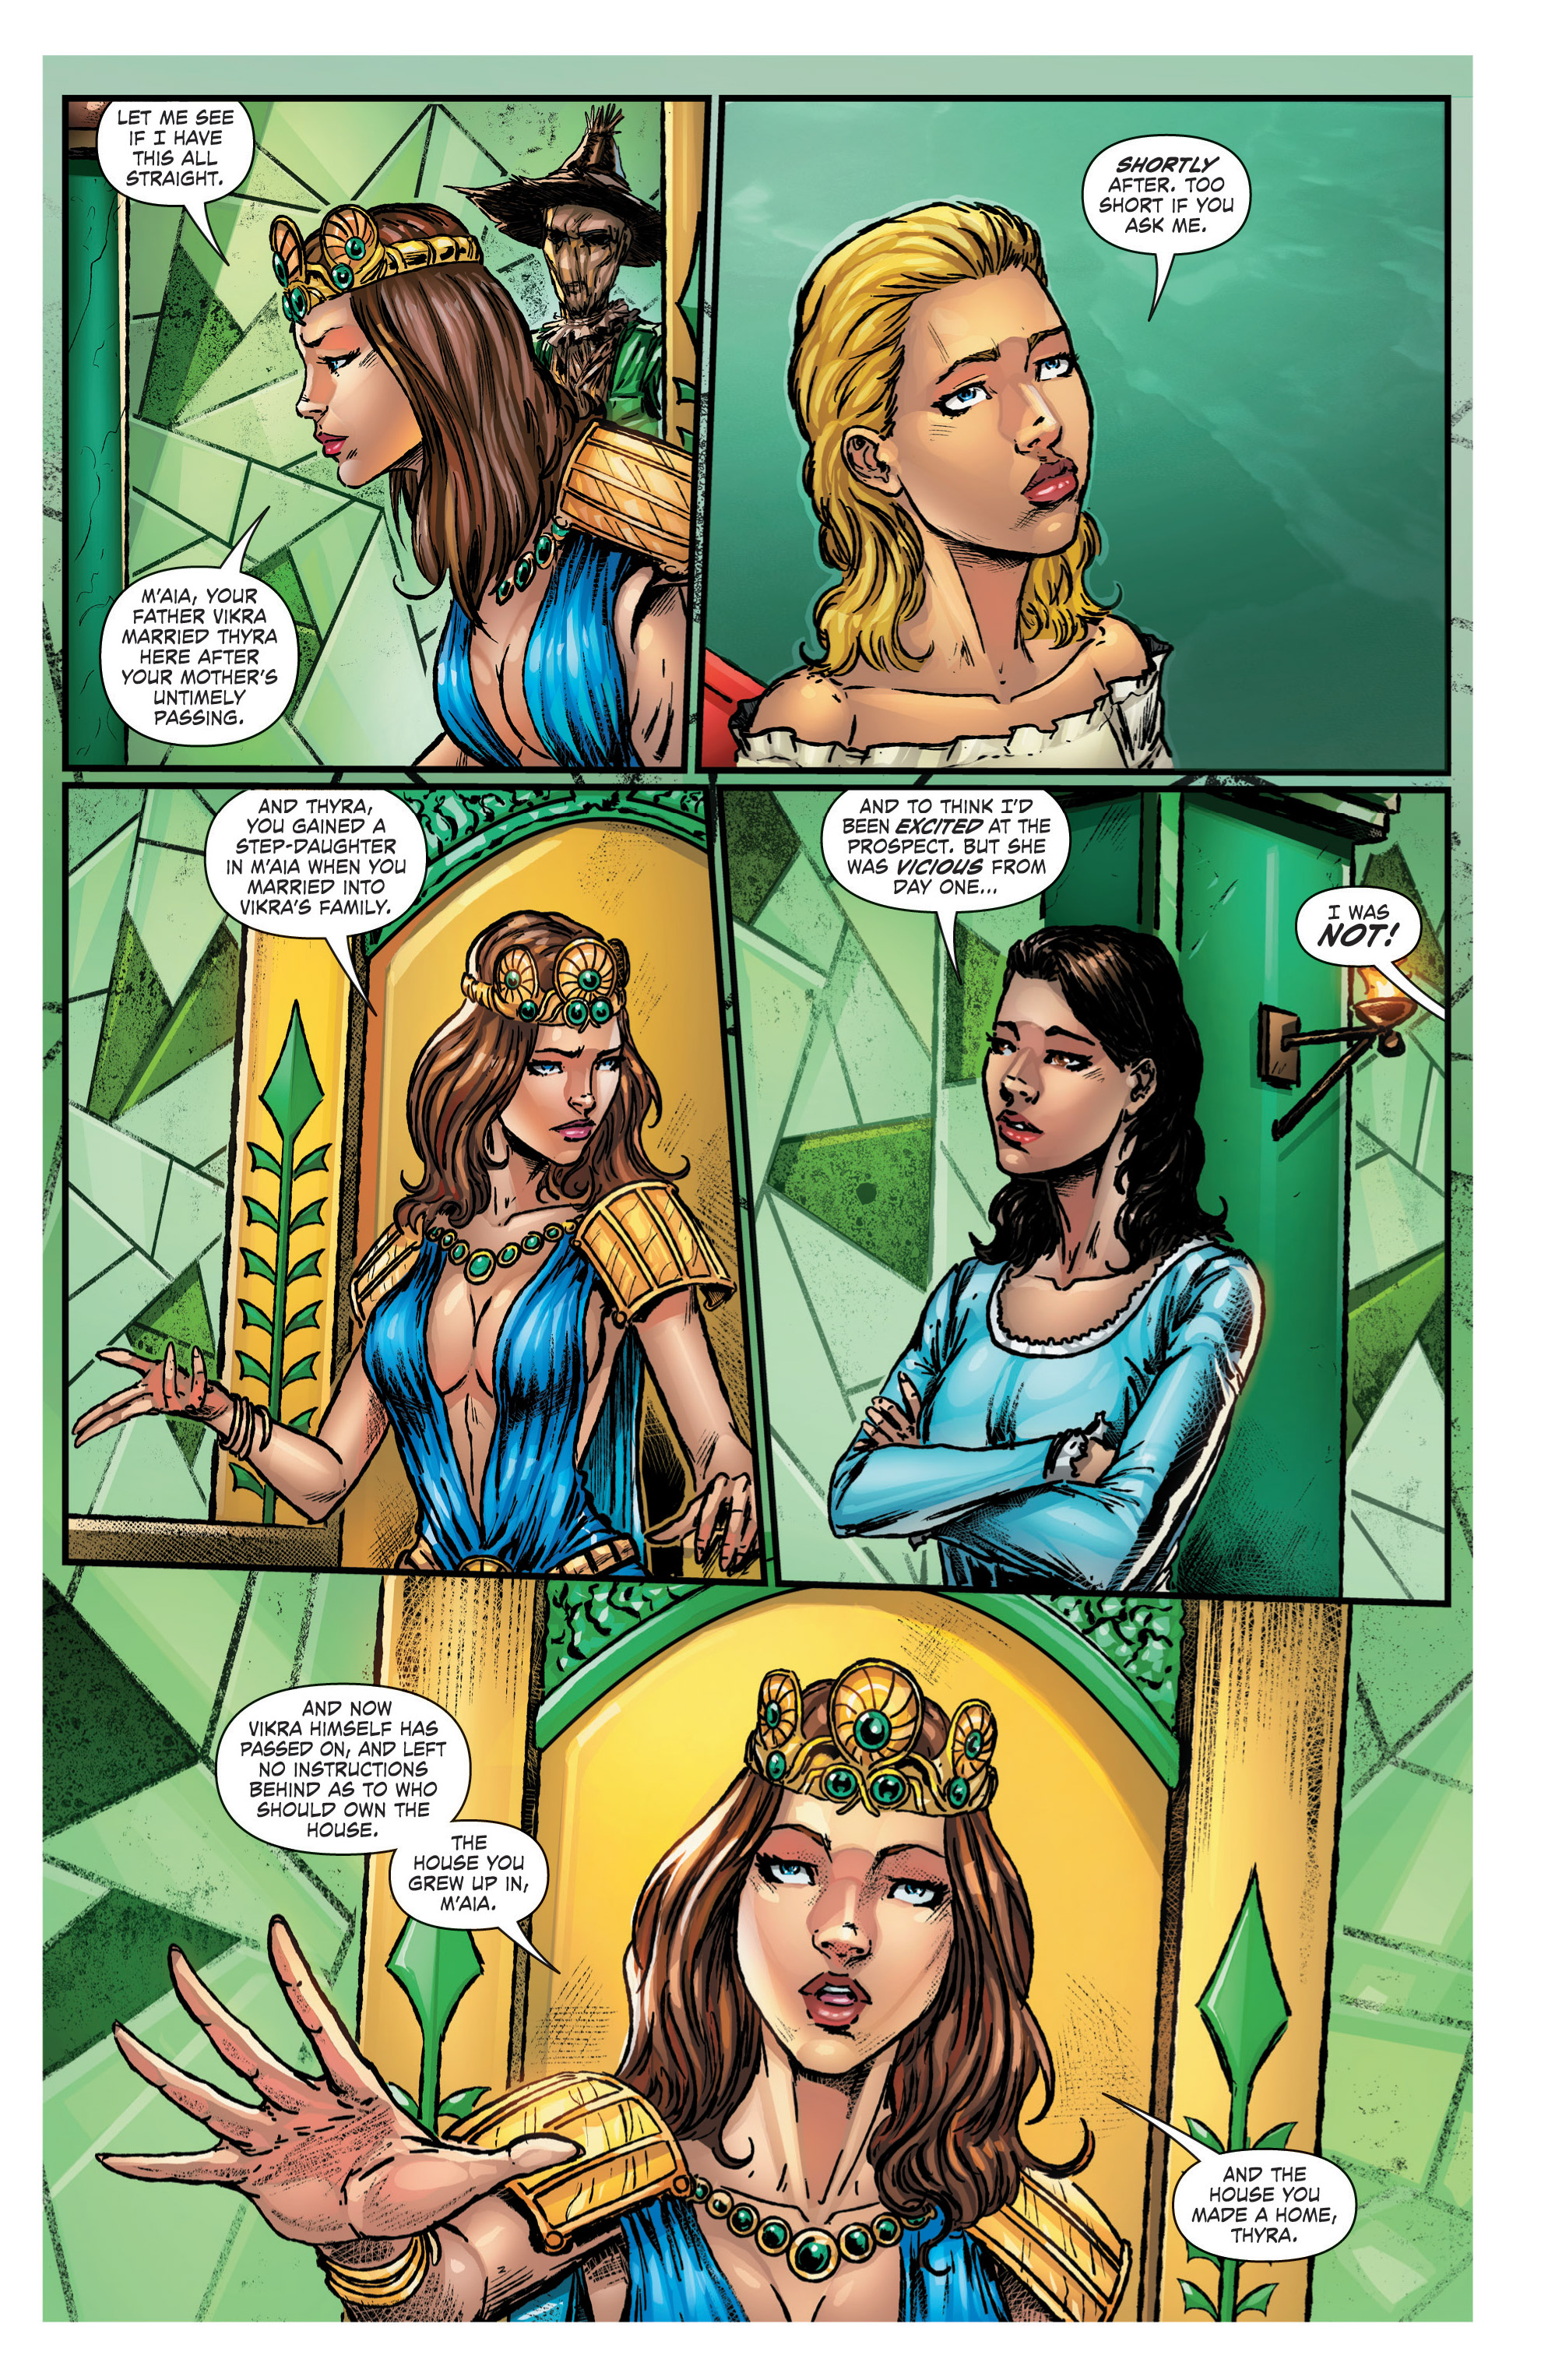 Oz 2021 Annual: Patchwork Girl (2021): Chapter 1 - Page 4